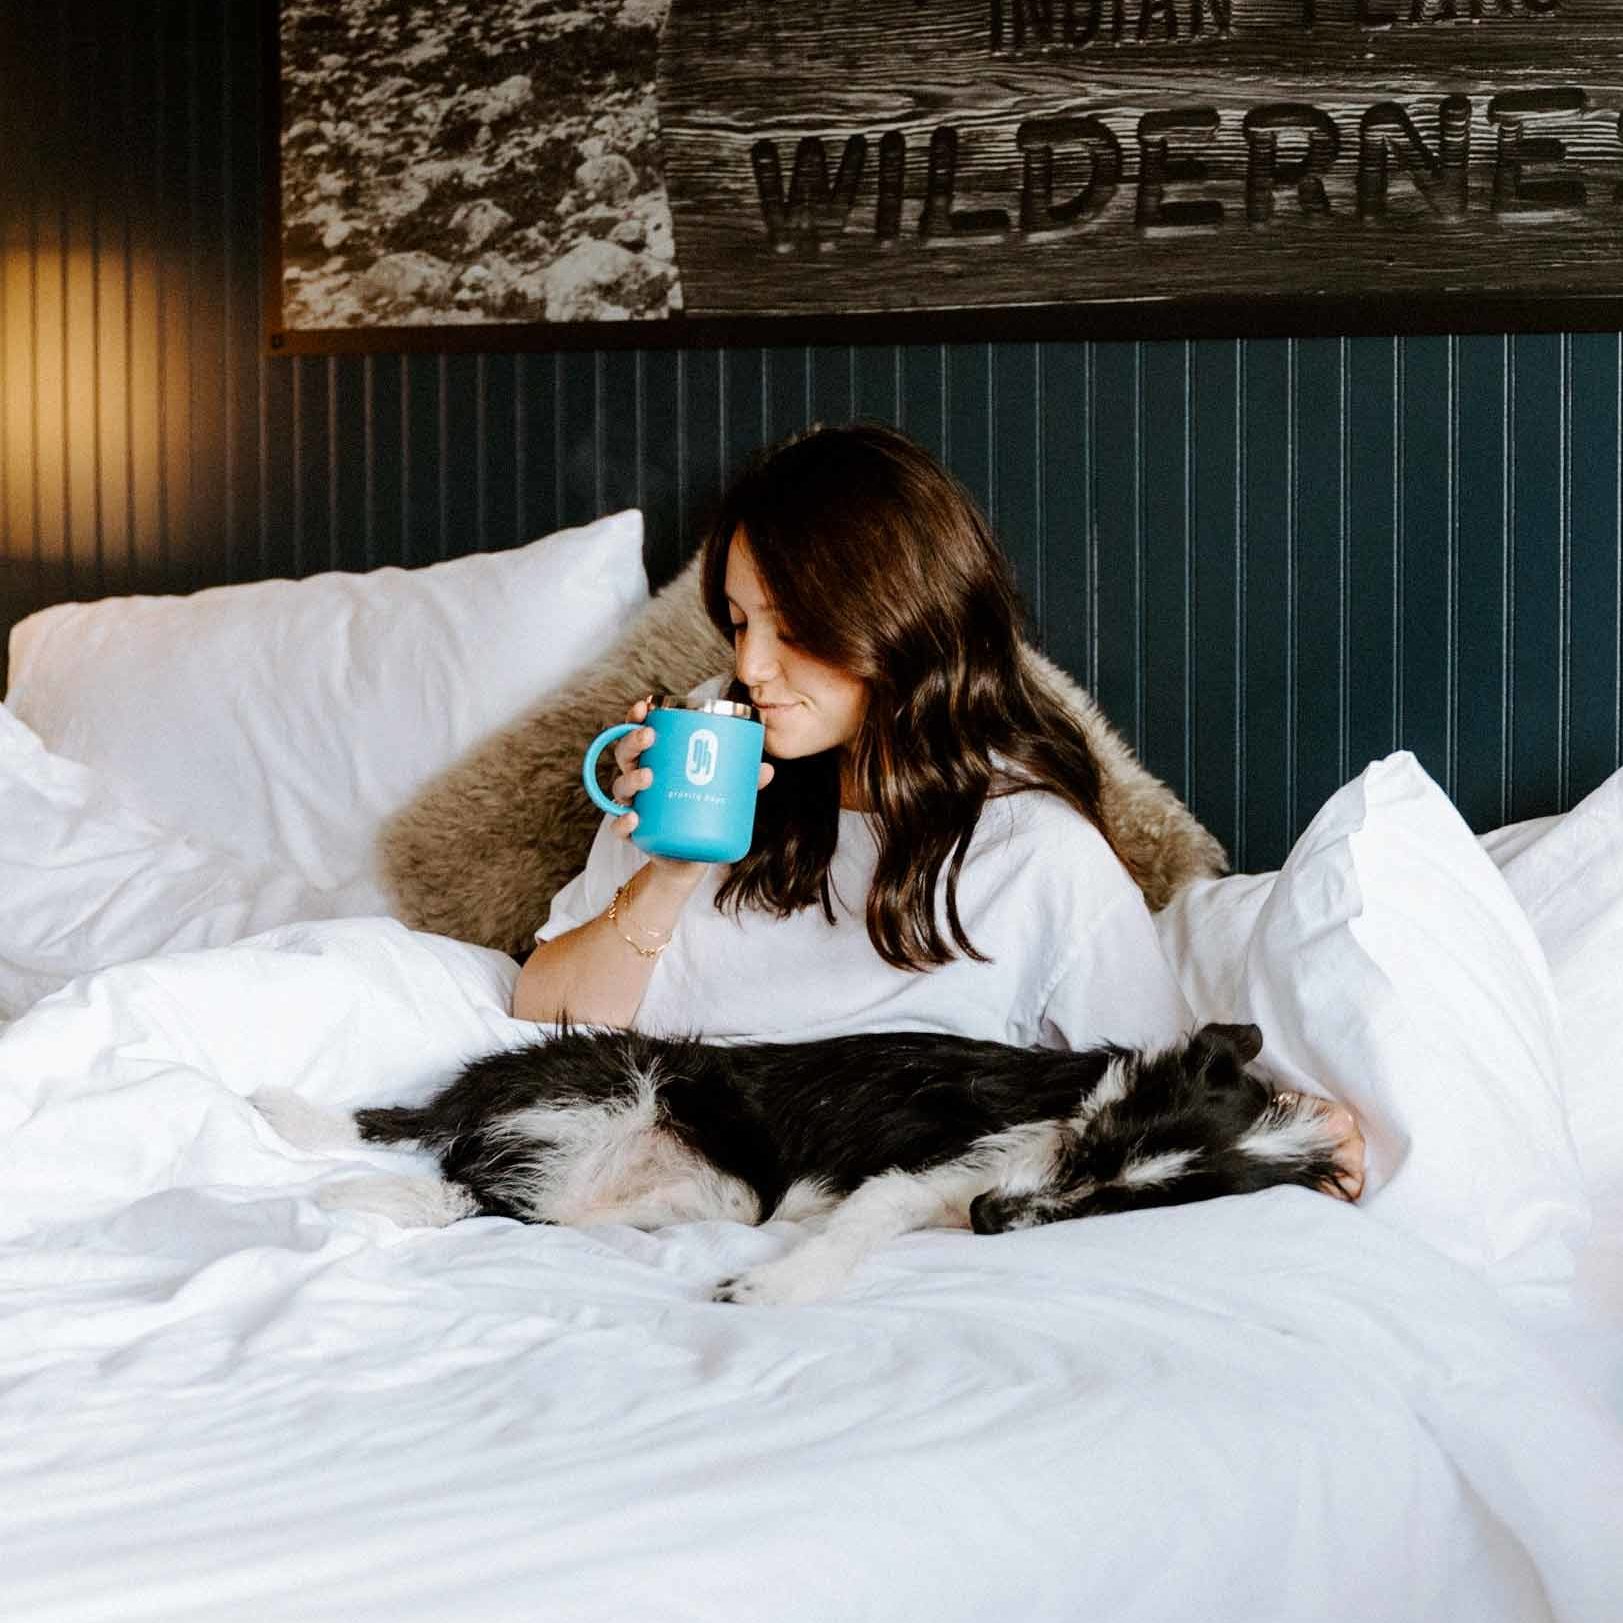 Gravity Haus Winter Park guest enjoying beverage in bed with pup